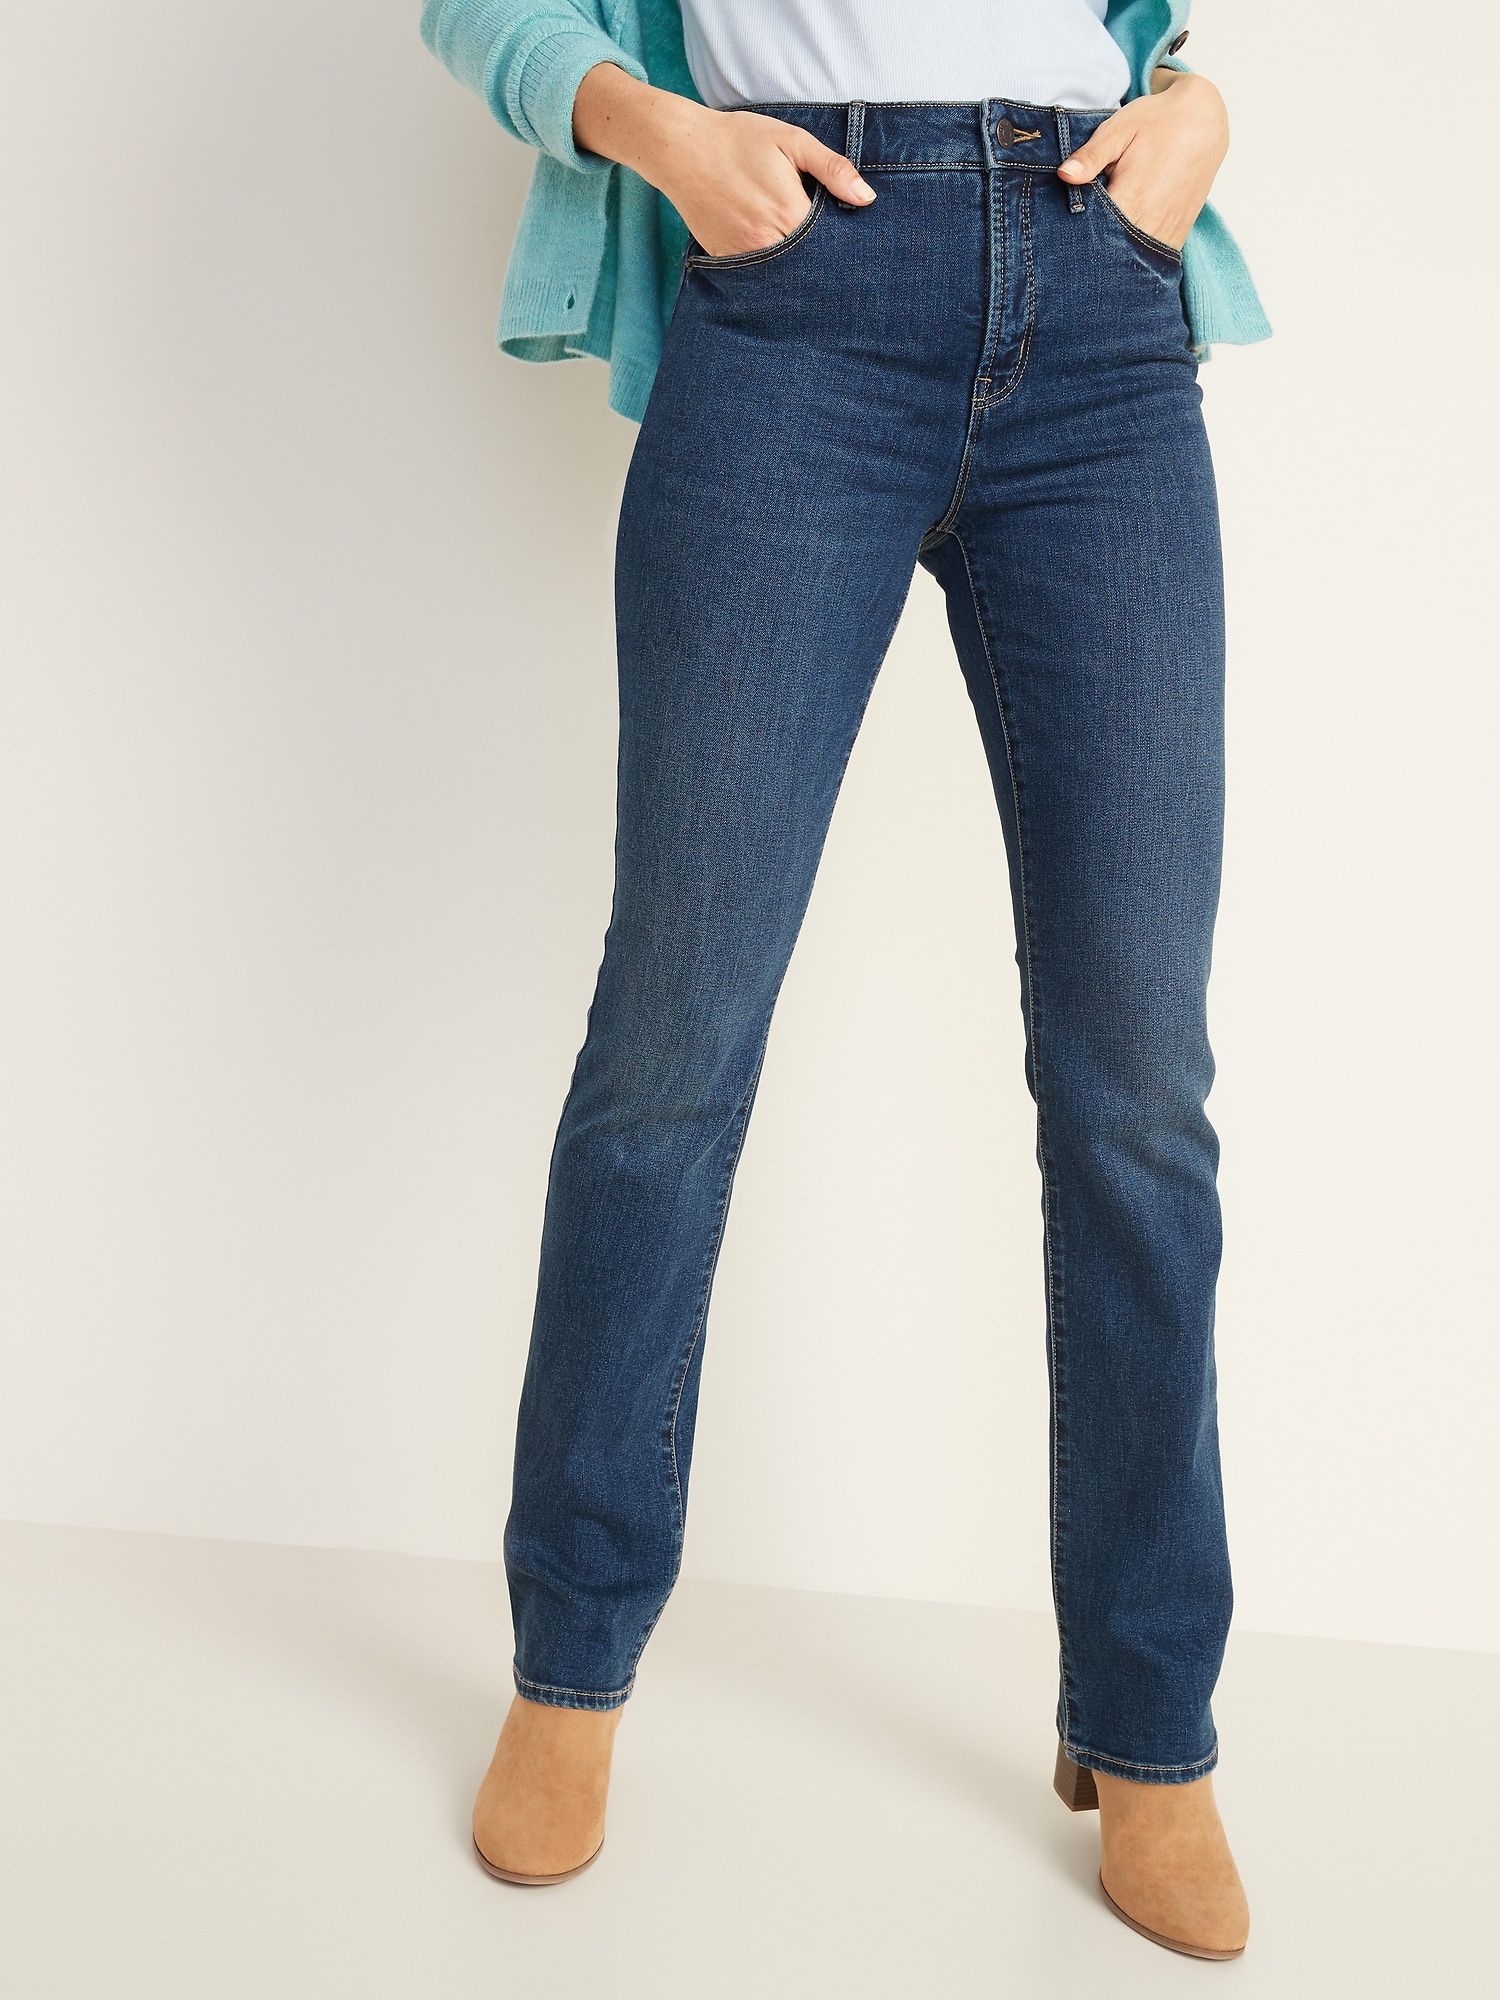 High-Waisted Kicker Boot-Cut Jeans For 